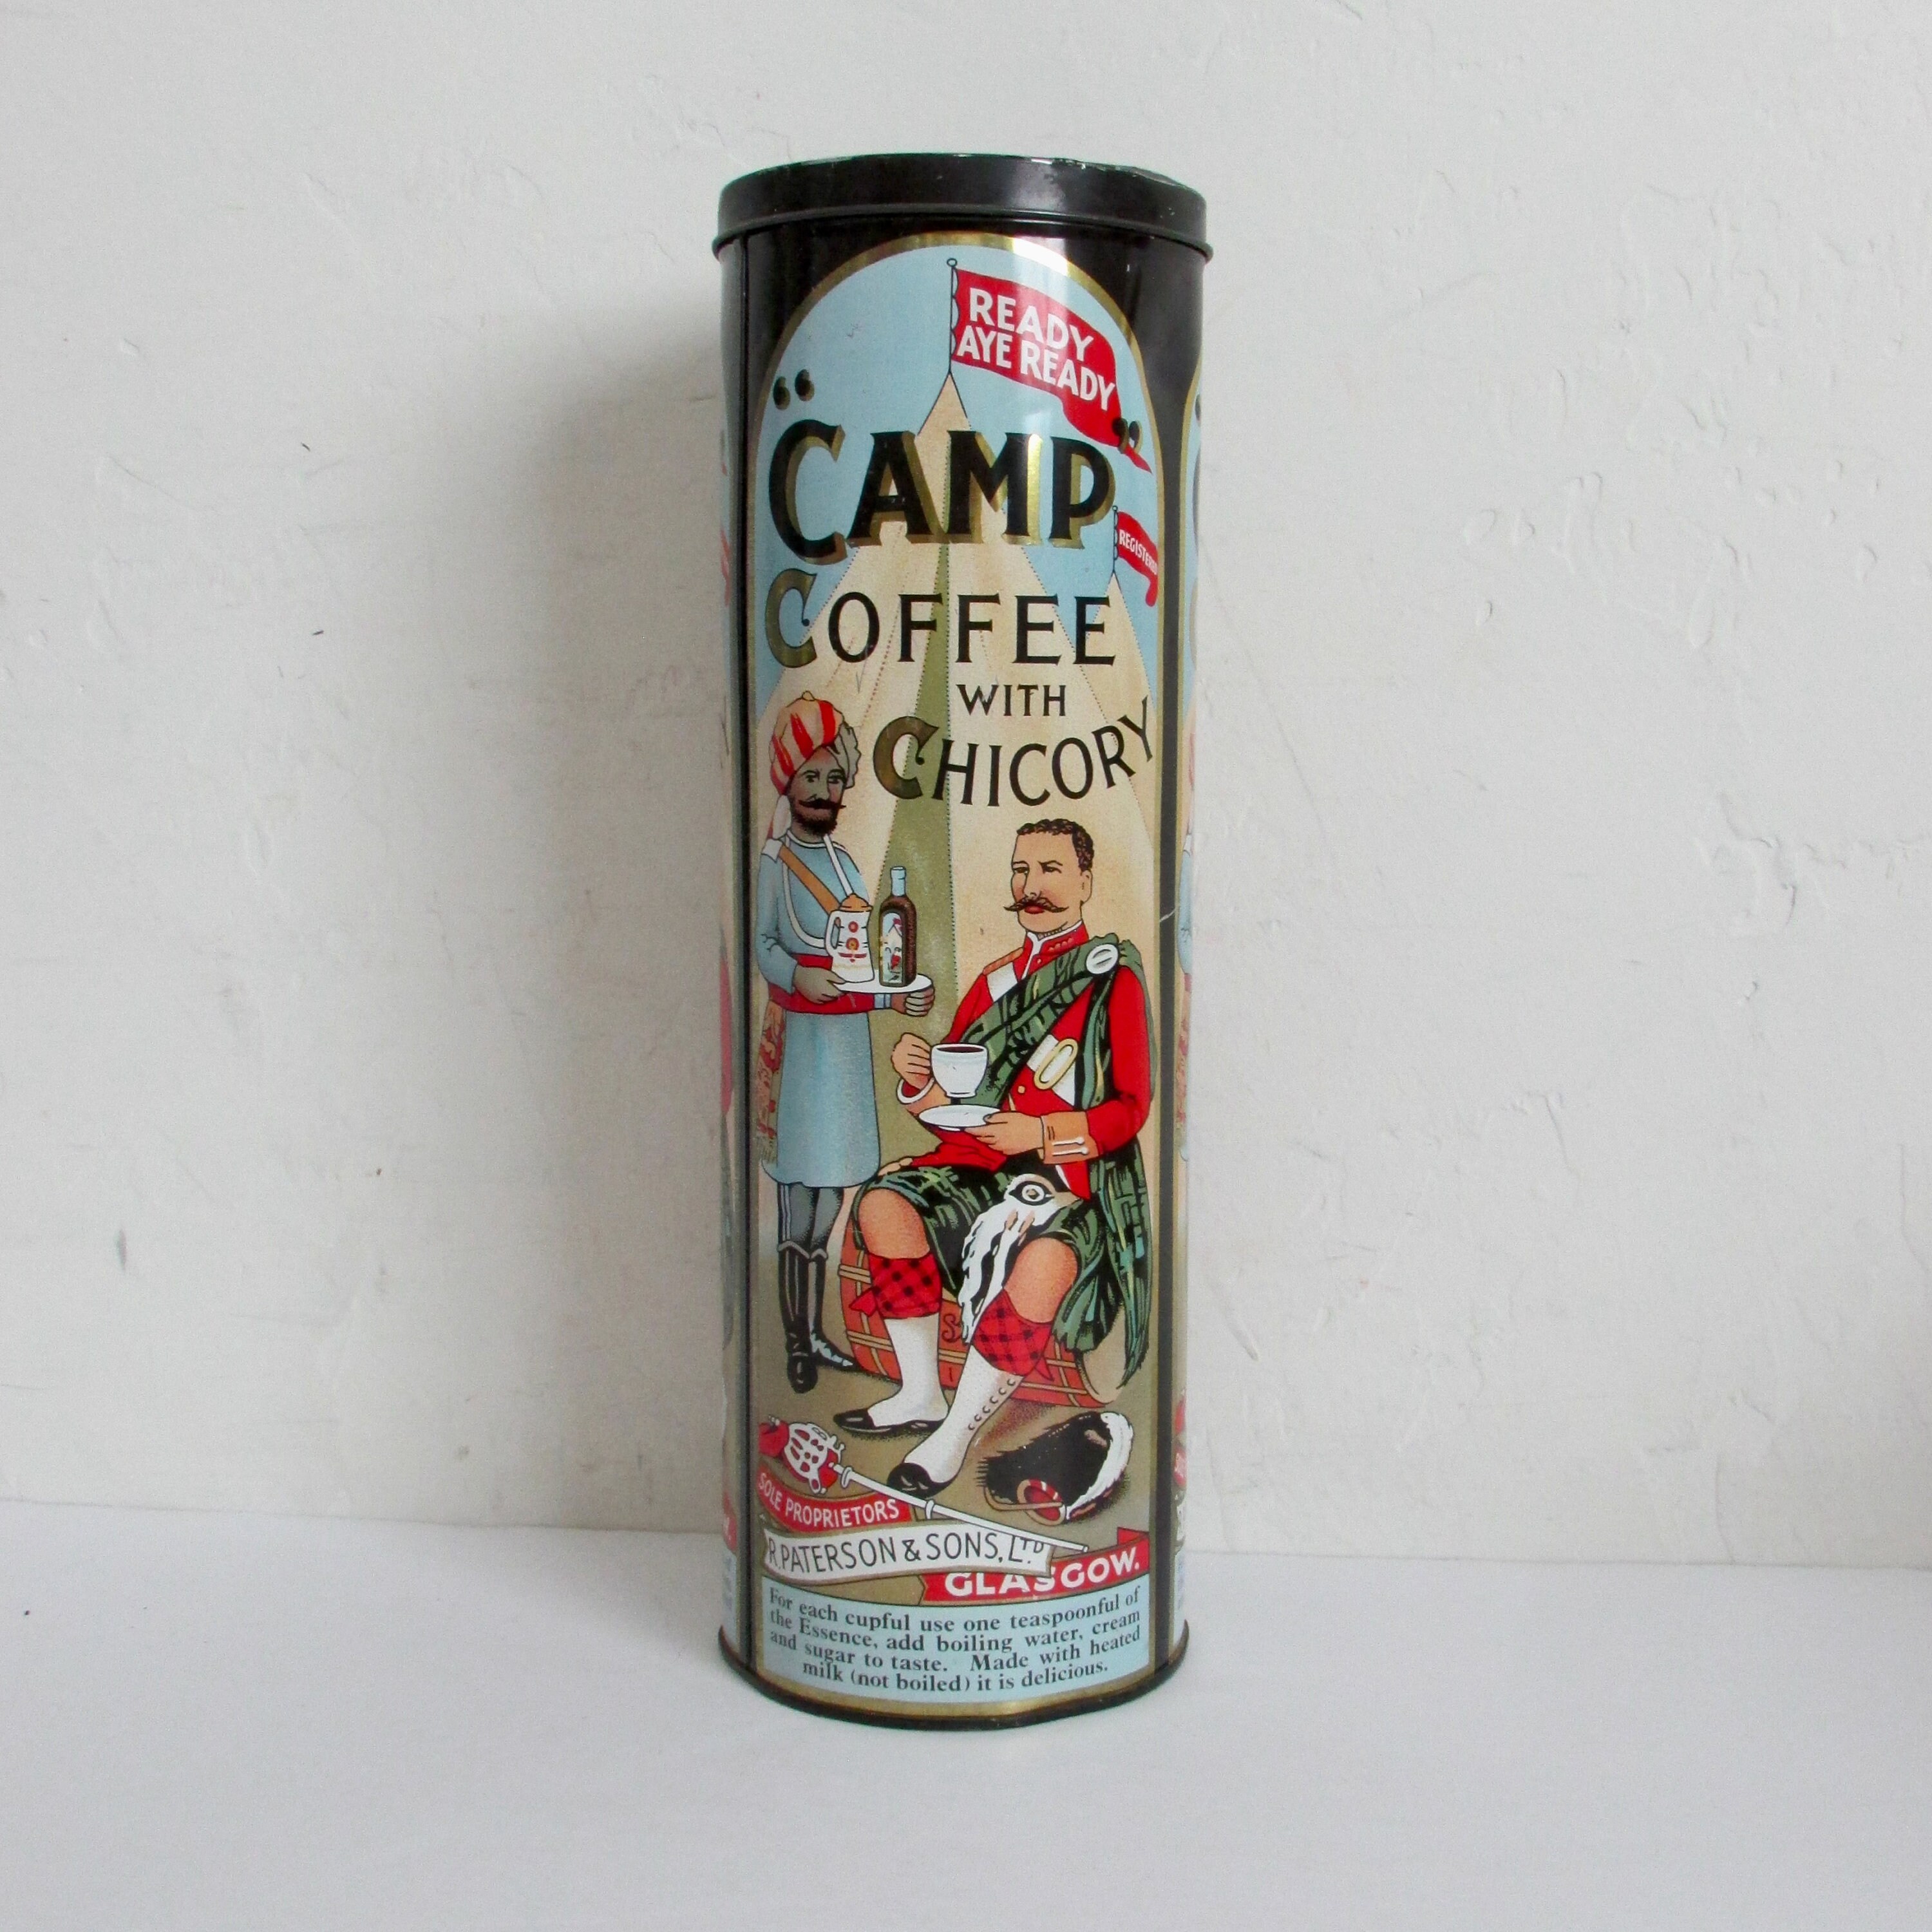 Camp Coffee and Chicory R. Paterson & Sons, Glascow Scotland